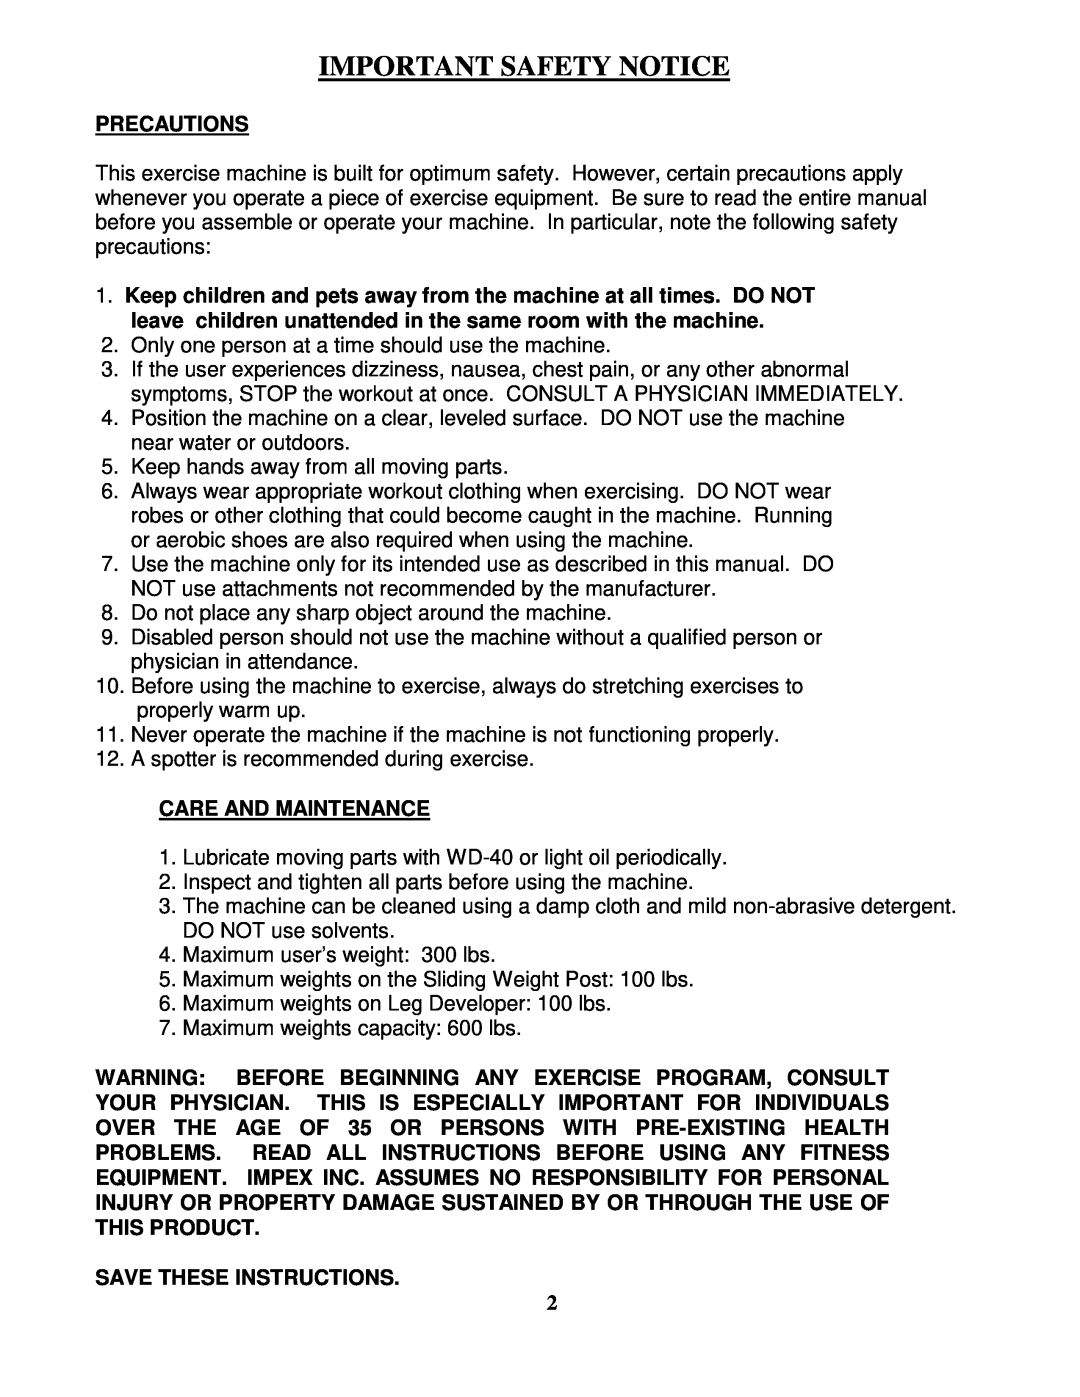 Impex MD-8850 manual Important Safety Notice, Precautions, Care And Maintenance, Save These Instructions 